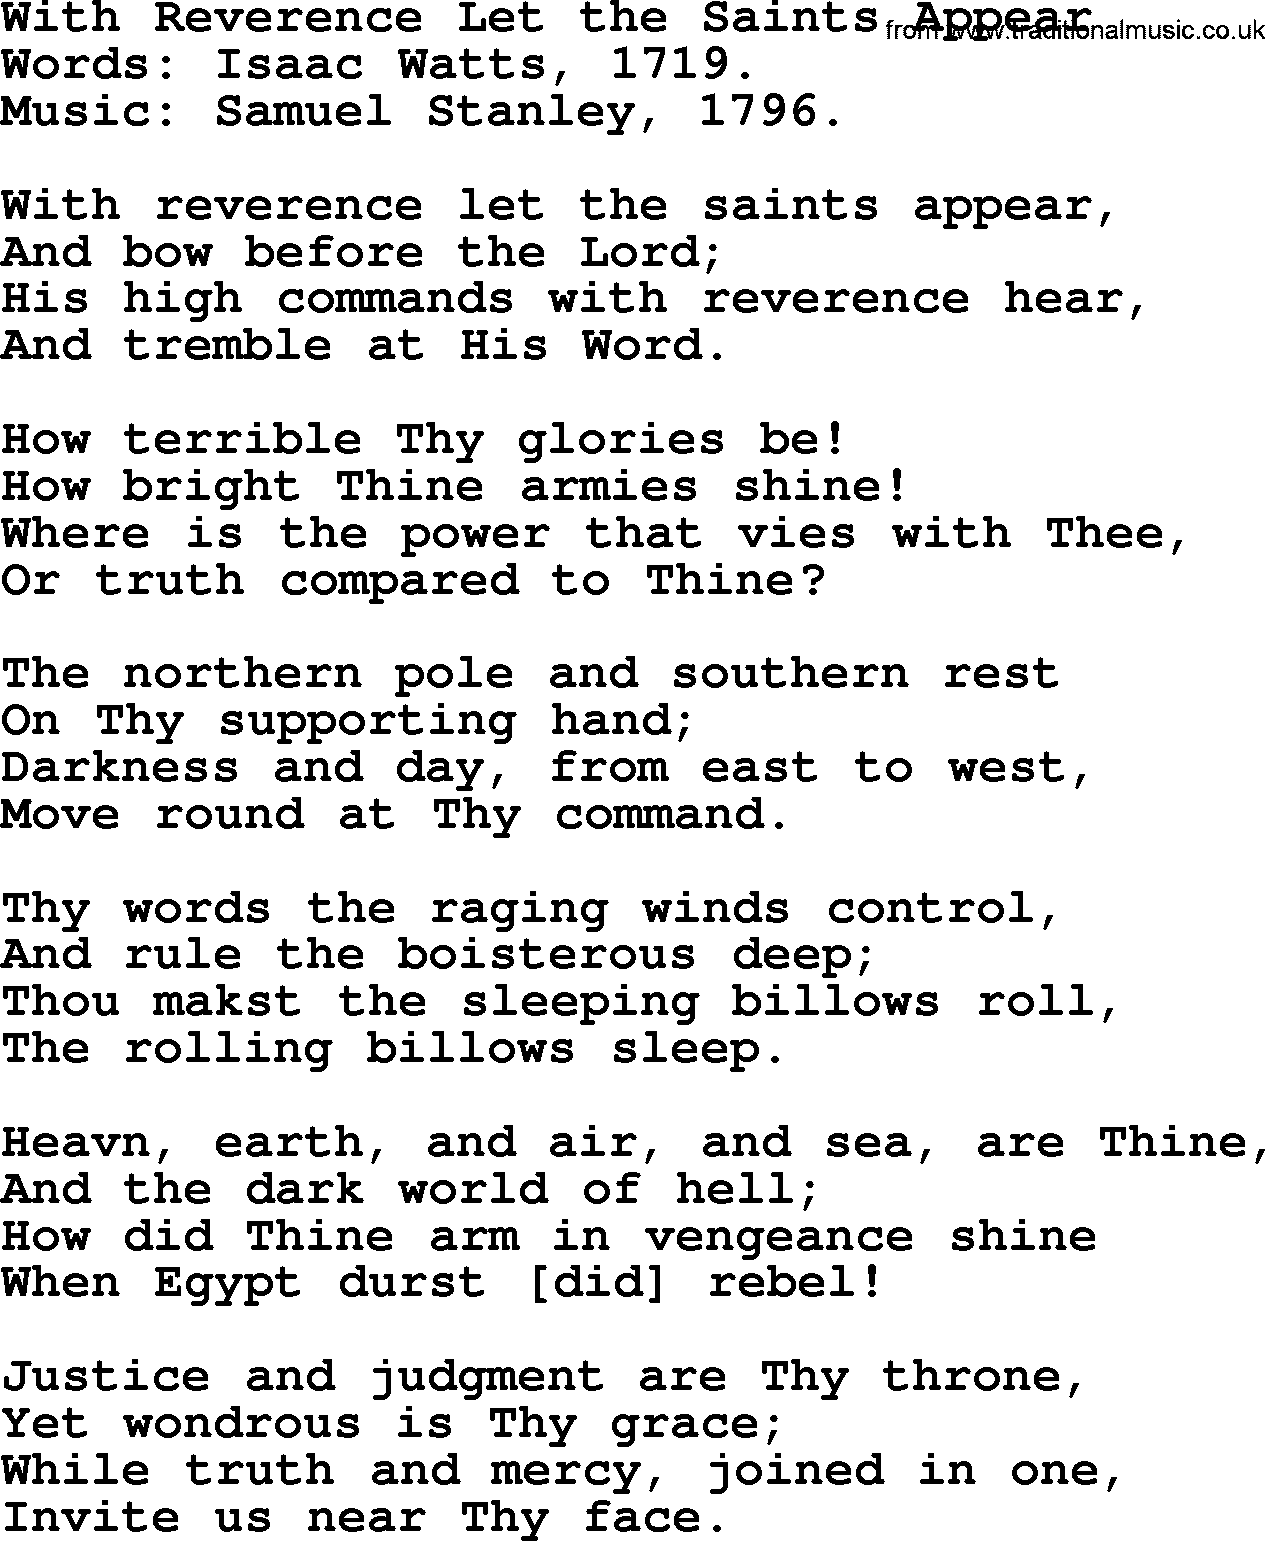 Isaac Watts Christian hymn: With Reverence Let the Saints Appear- lyricss